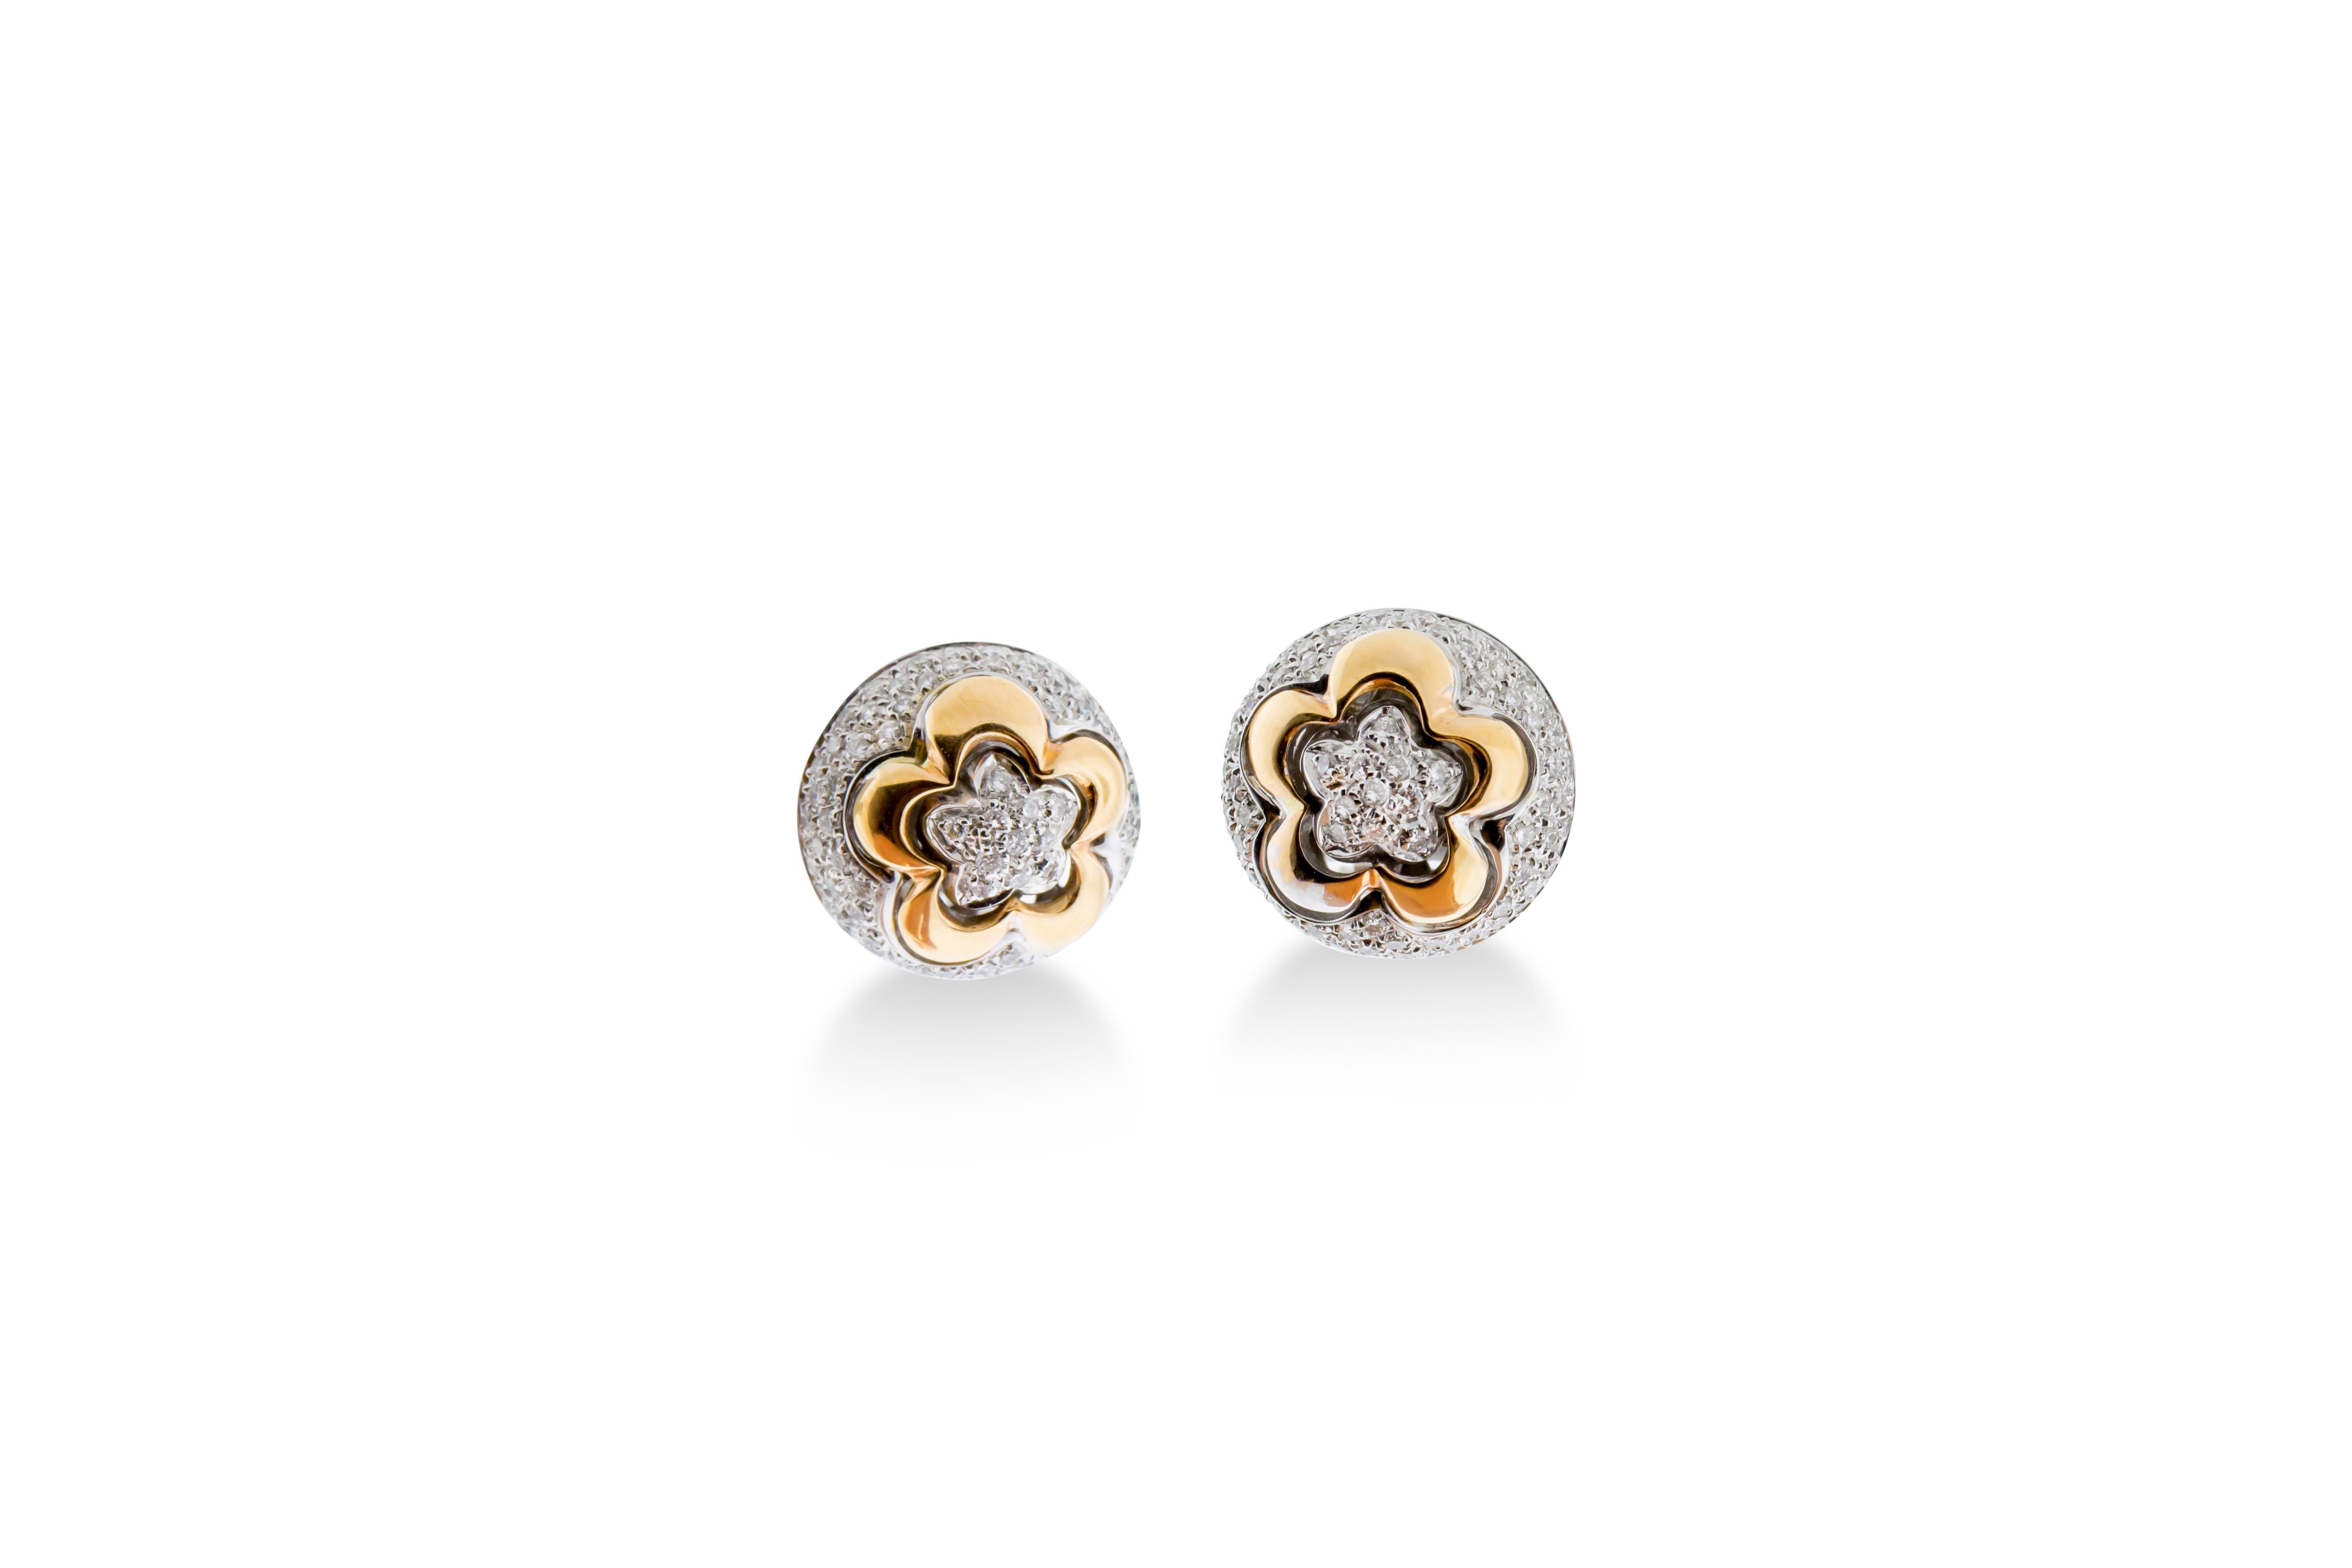 A pair of ear clips featuring 1.44 carats of G-H VS round diamonds set in 12 grams of 18K rose and white gold. 16mm diameter.

Viewings available in our NYC showroom by appointment.